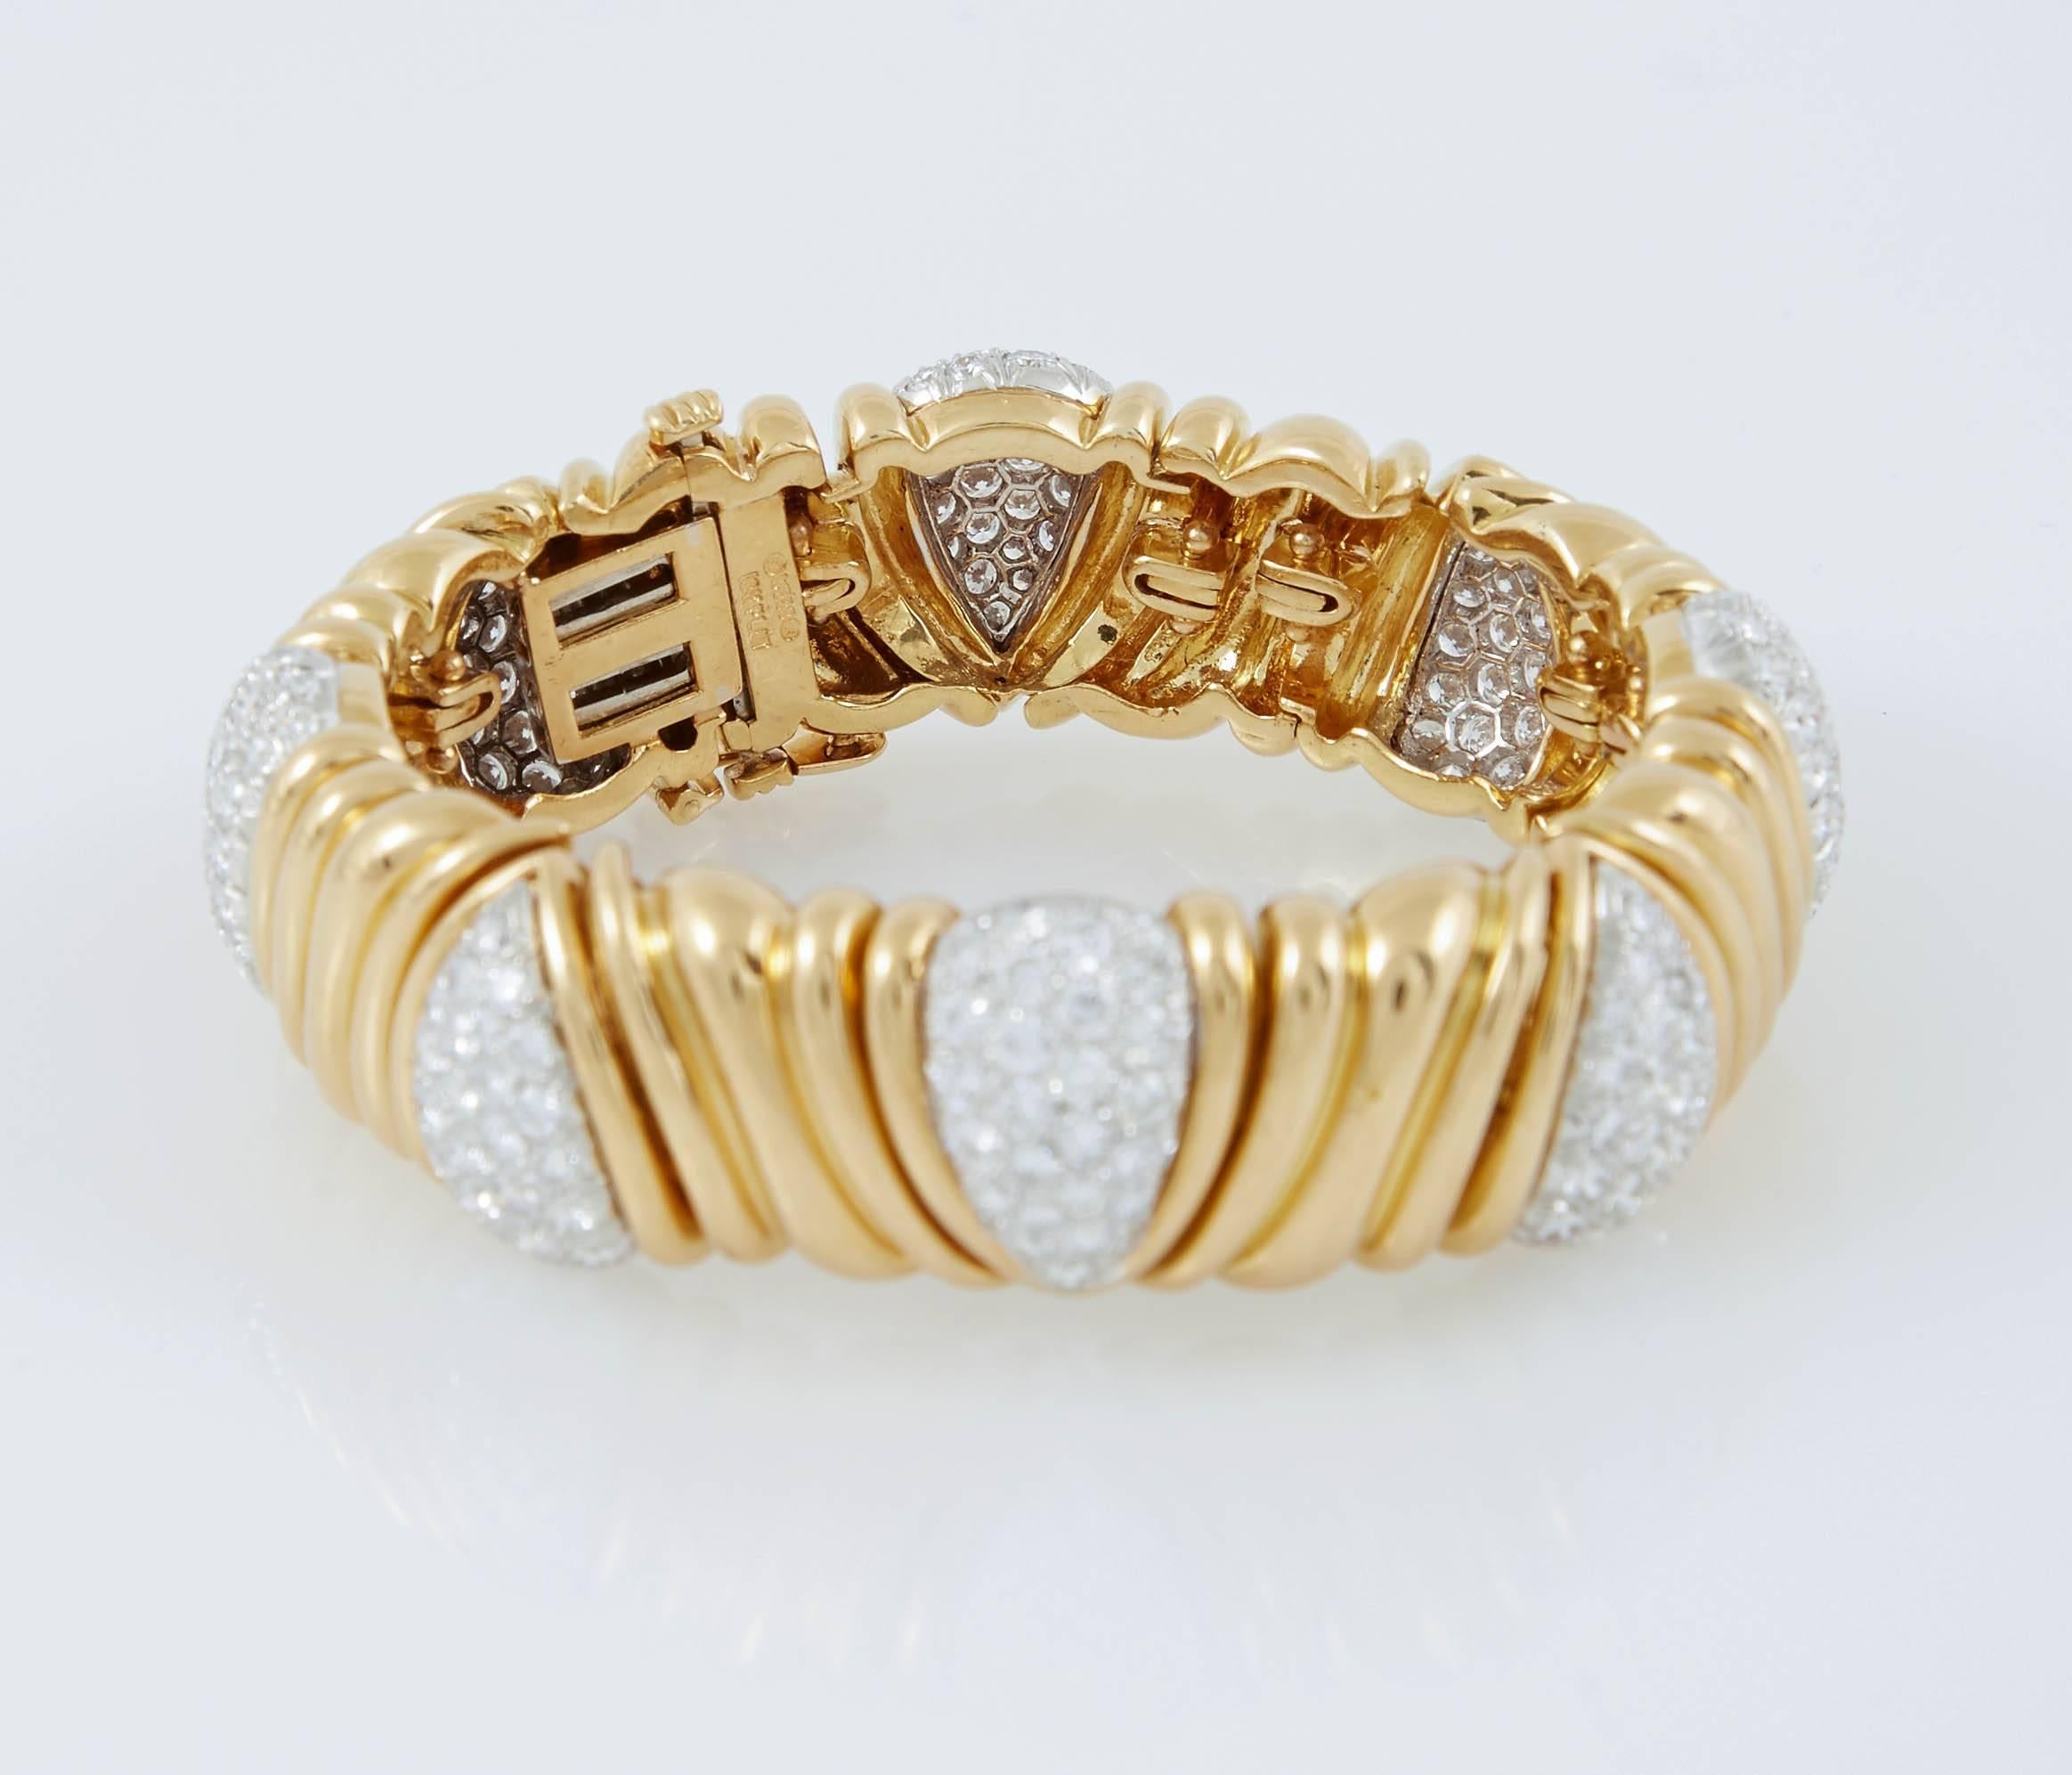 David Webb Gold Diamond Bracelet In Excellent Condition For Sale In New York, NY